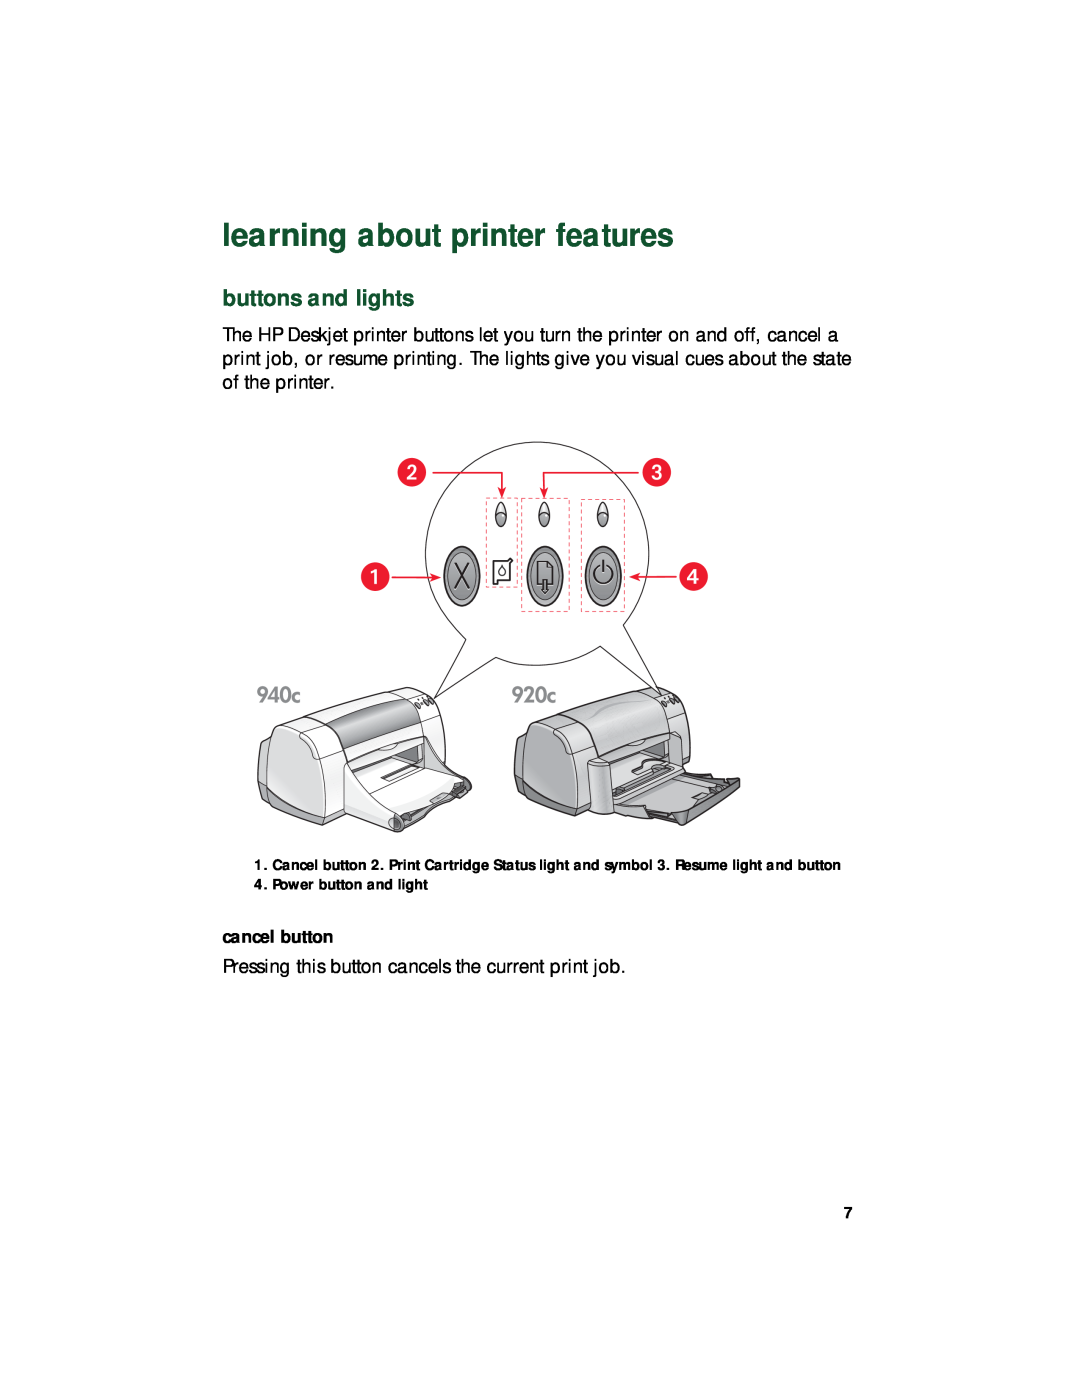 HP 920c, 948c, 940c manual learning about printer features, buttons and lights 